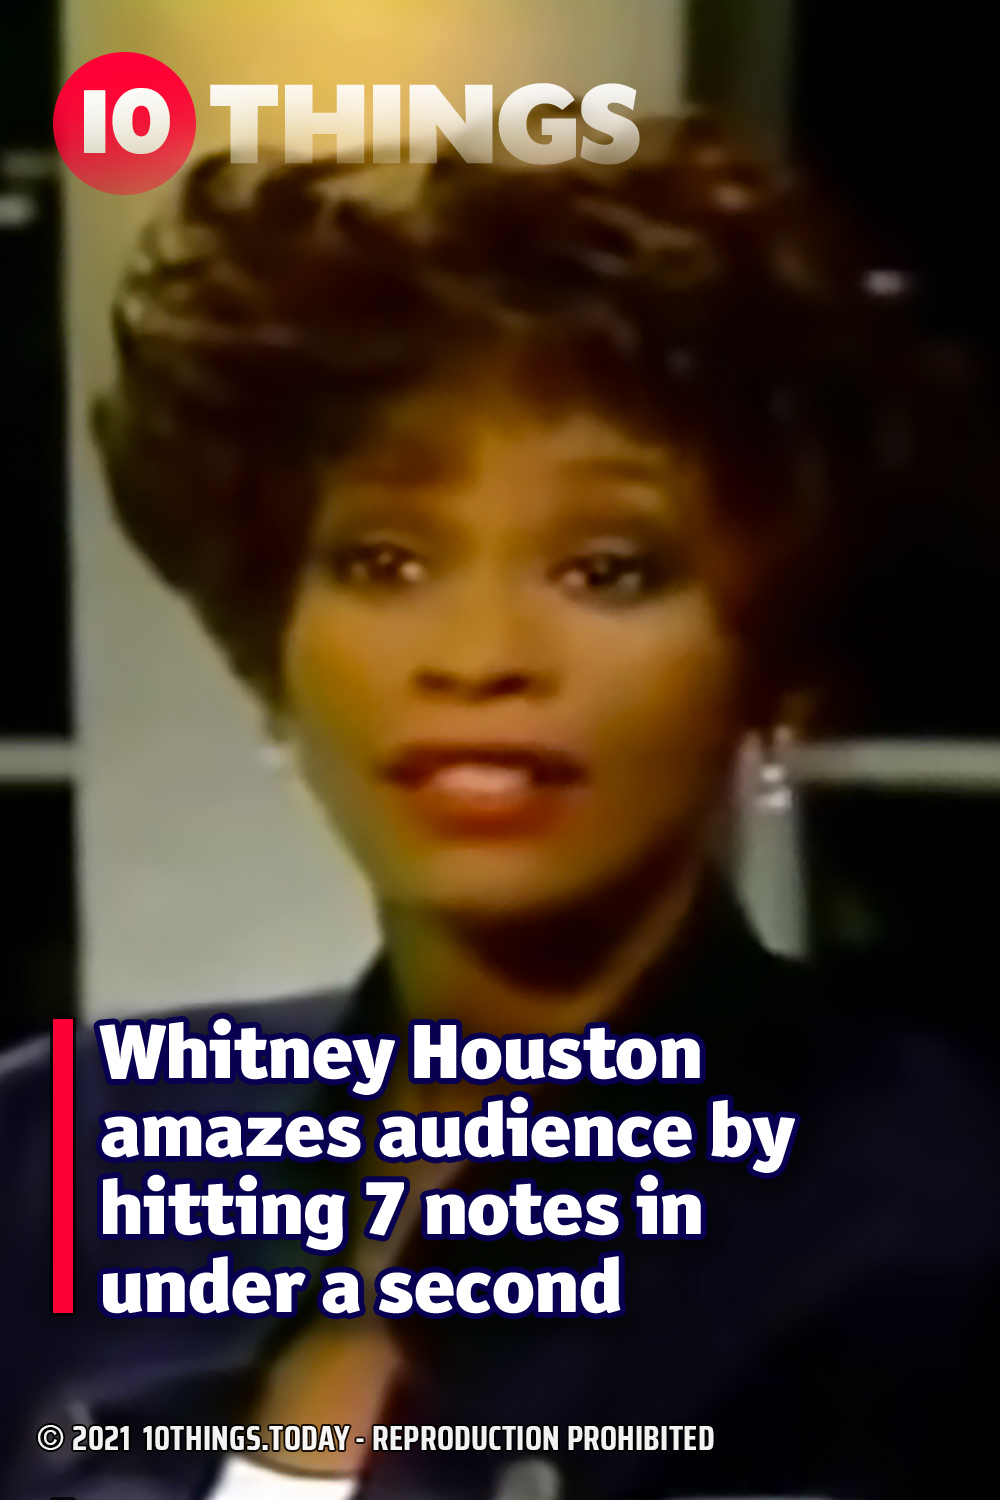 Whitney Houston amazes audience by hitting 7 notes in under a second